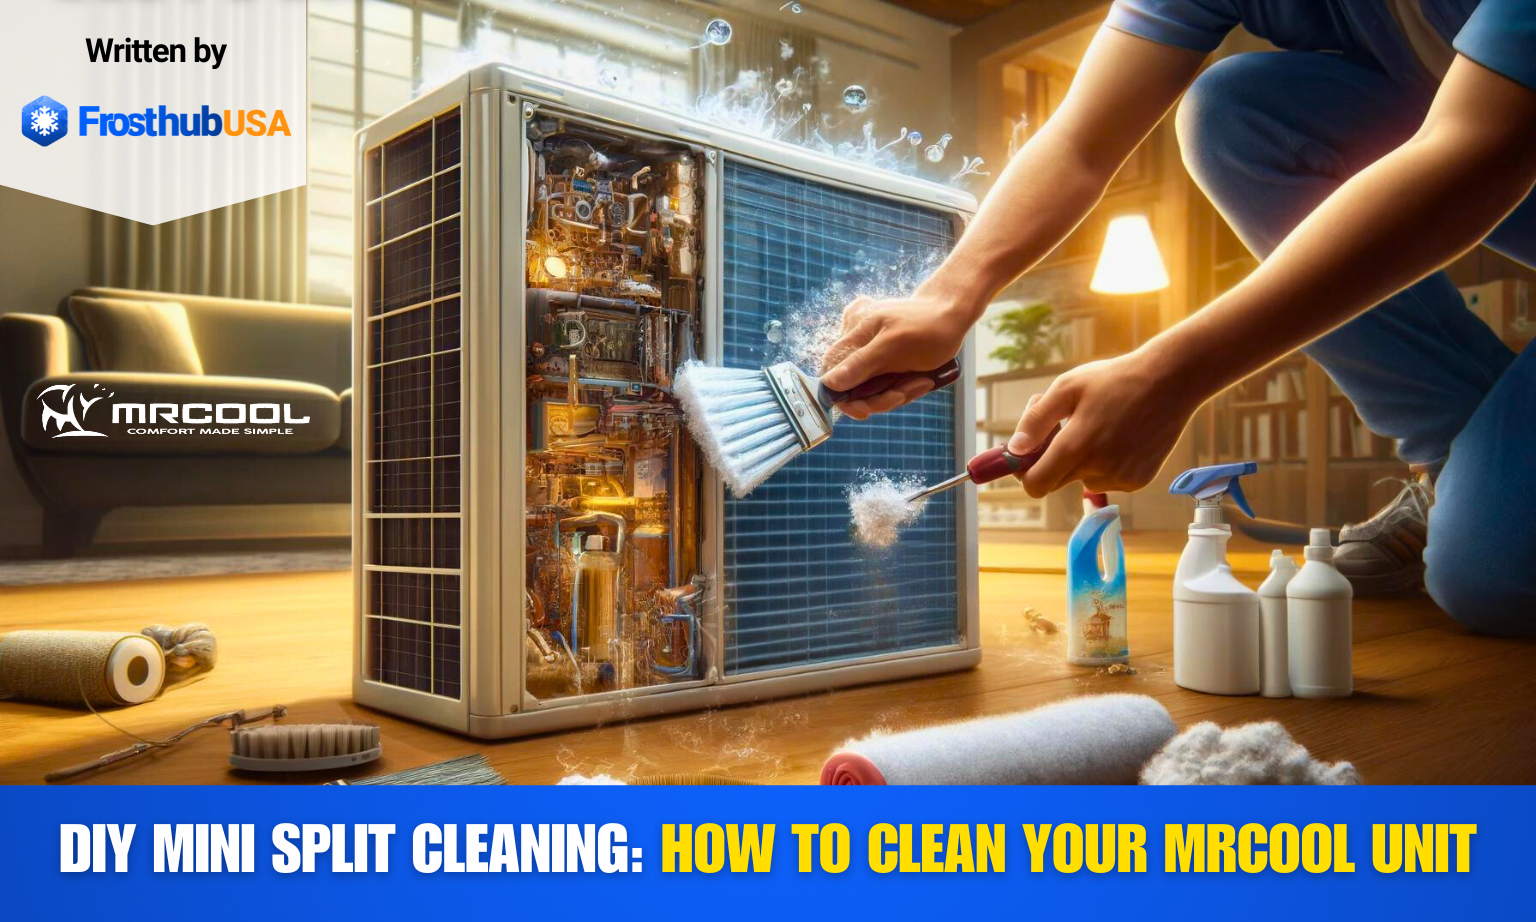 DIY mini-split cleaning: How to clean your MRCOOL unit - FrosthubUSA